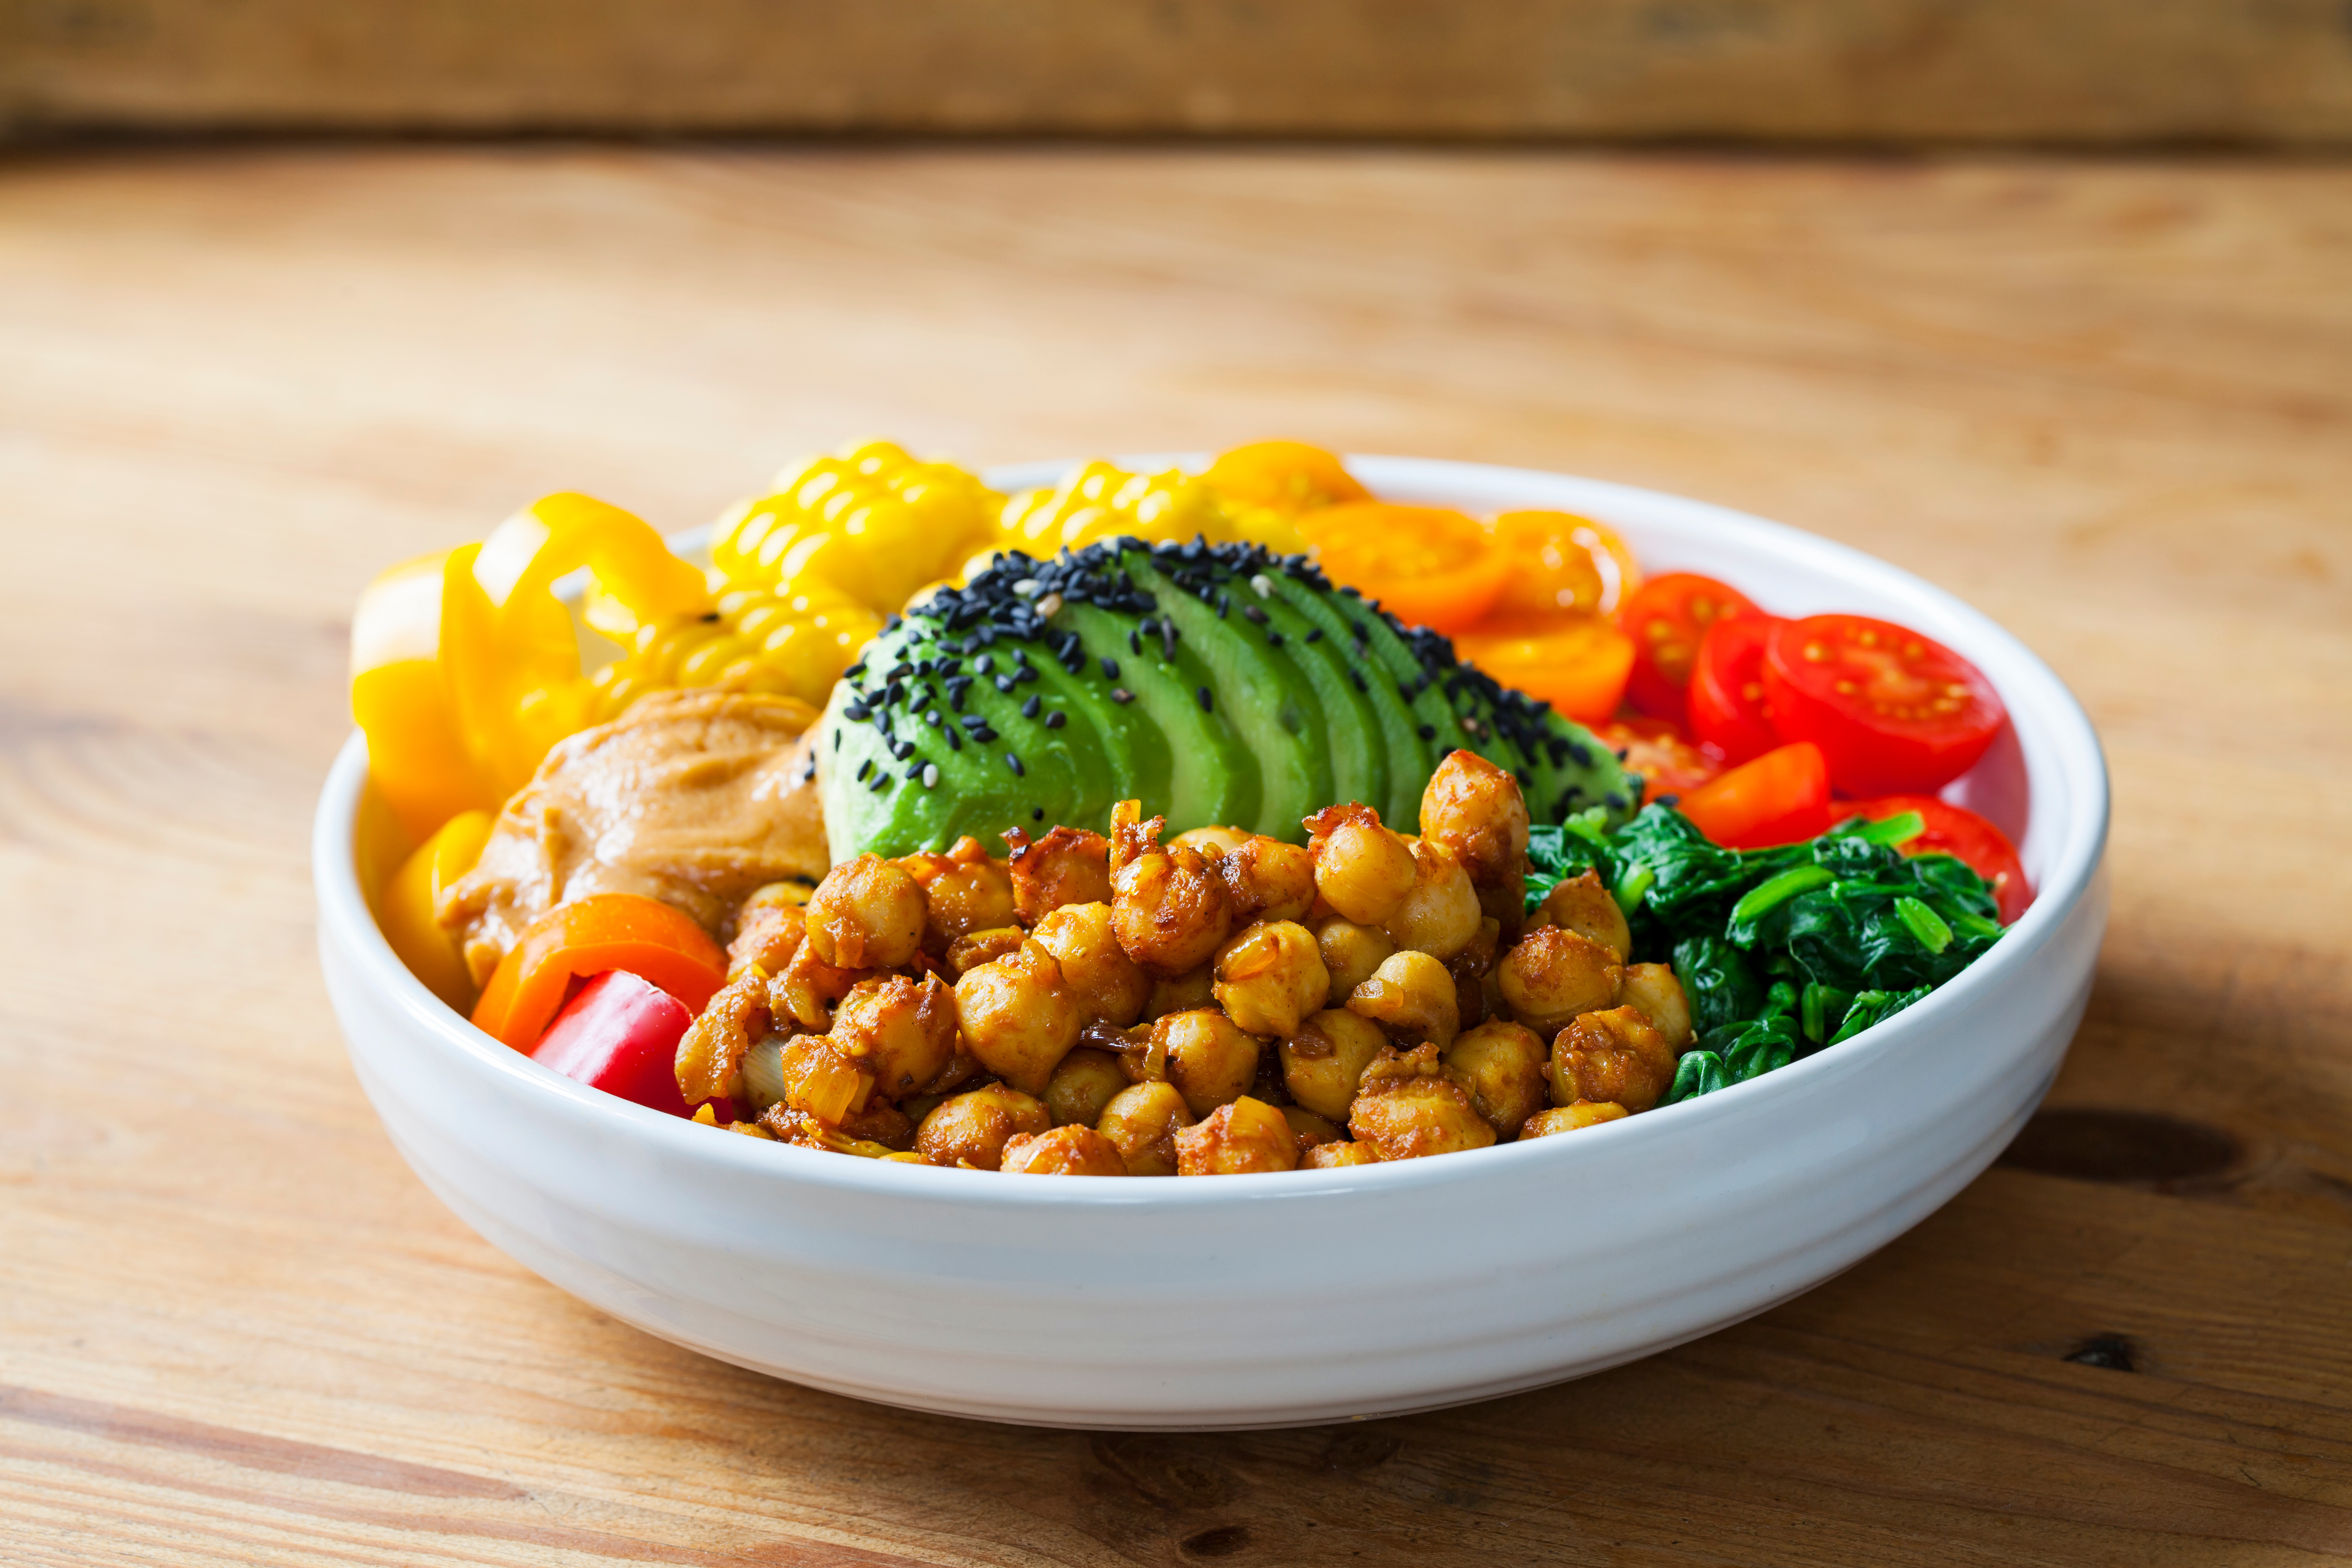 A veggie bowl that shows how to thrive on a plant-based diet